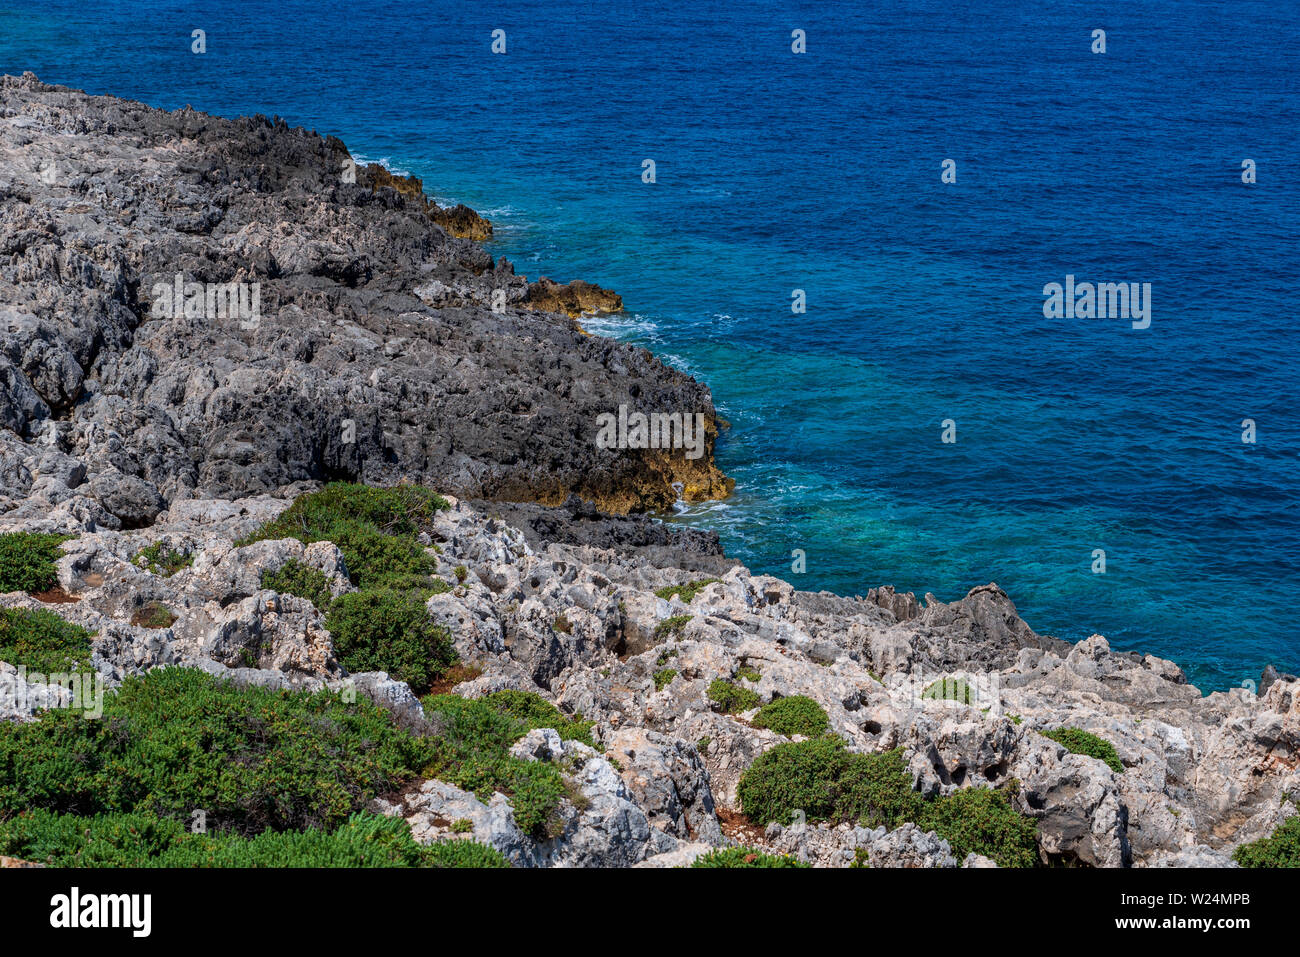 View over the rocky coast at the North Cape of Zakynthos, beautiful blue sea Stock Photo